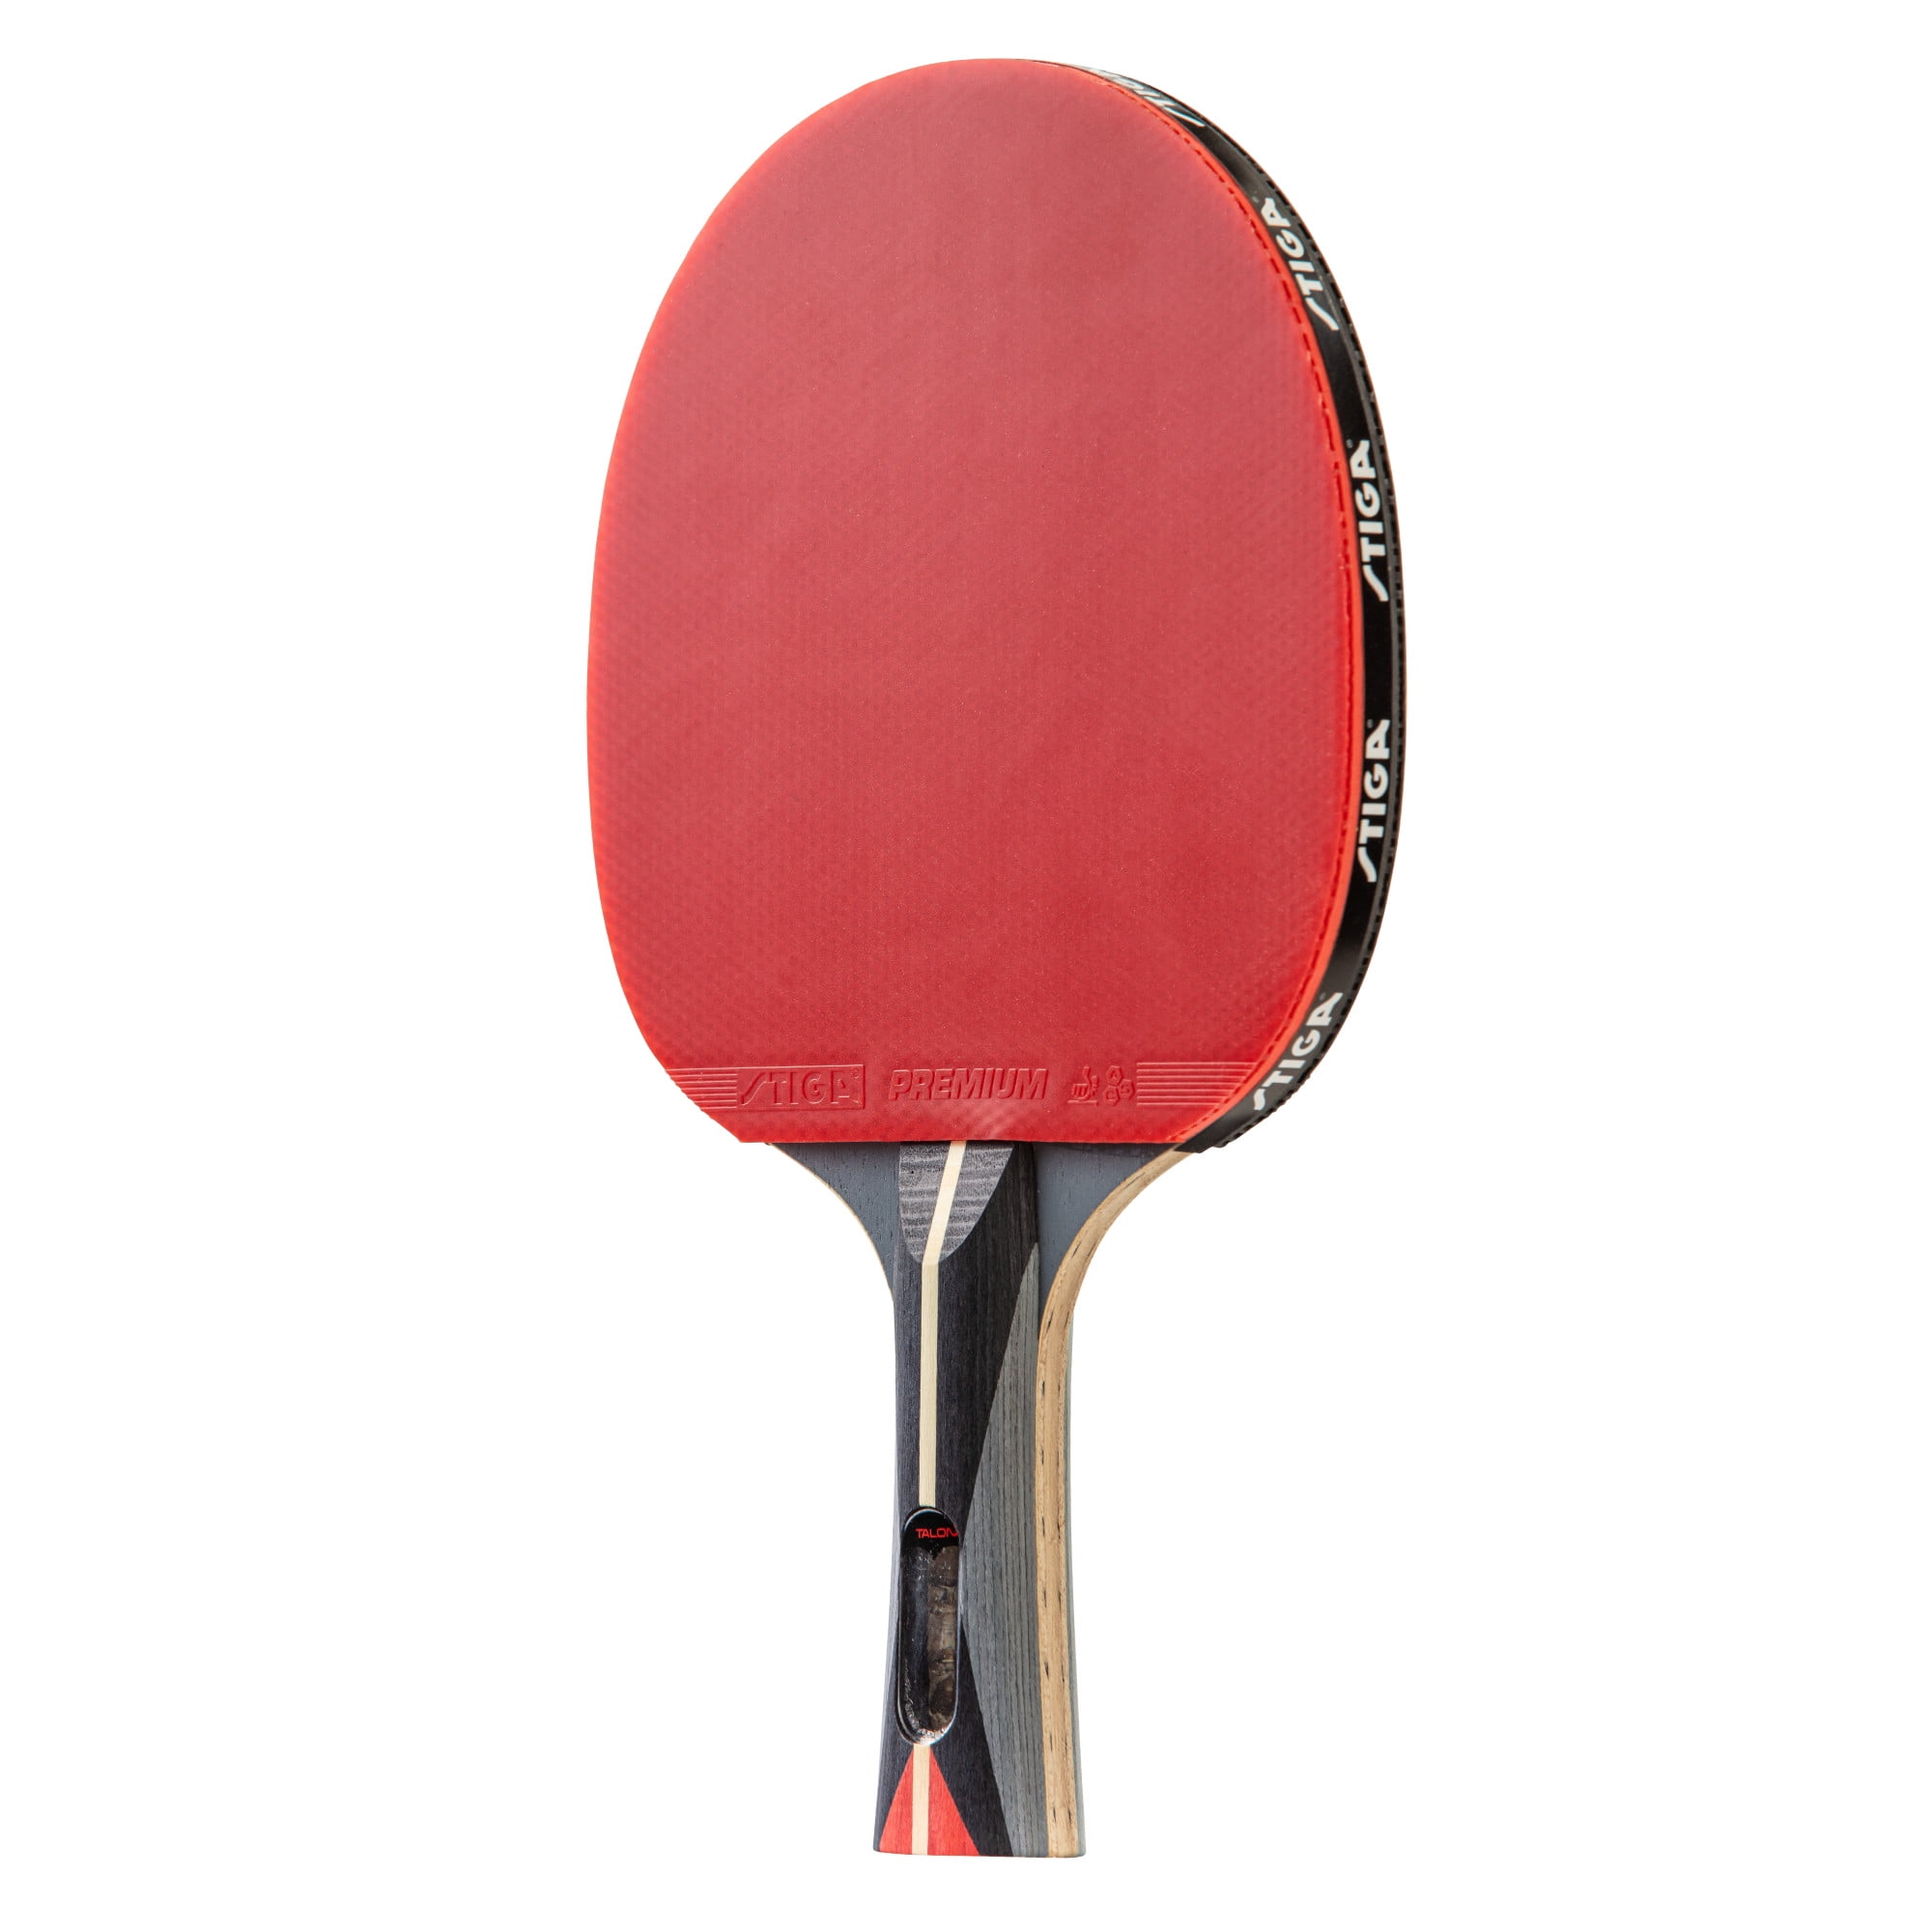 Idoraz Ping Pong Paddle Professional Racket - Table Tennis Racket with  Carrying Case - ITTF Approved Rubber for Tournament Play - Best Table  Tennis